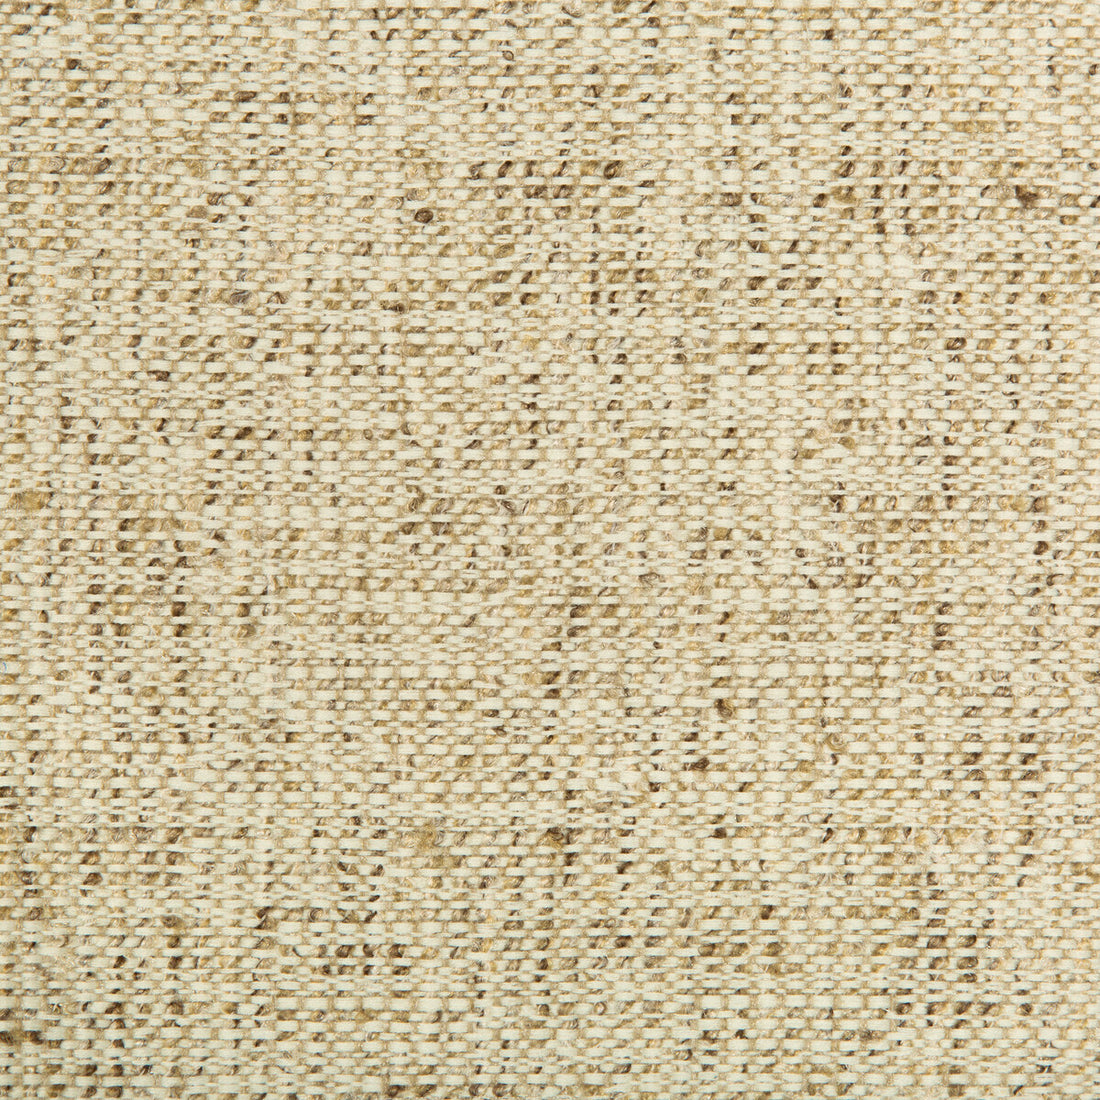 Kravet Smart fabric in 34616-616 color - pattern 34616.616.0 - by Kravet Smart in the Performance Crypton Home collection